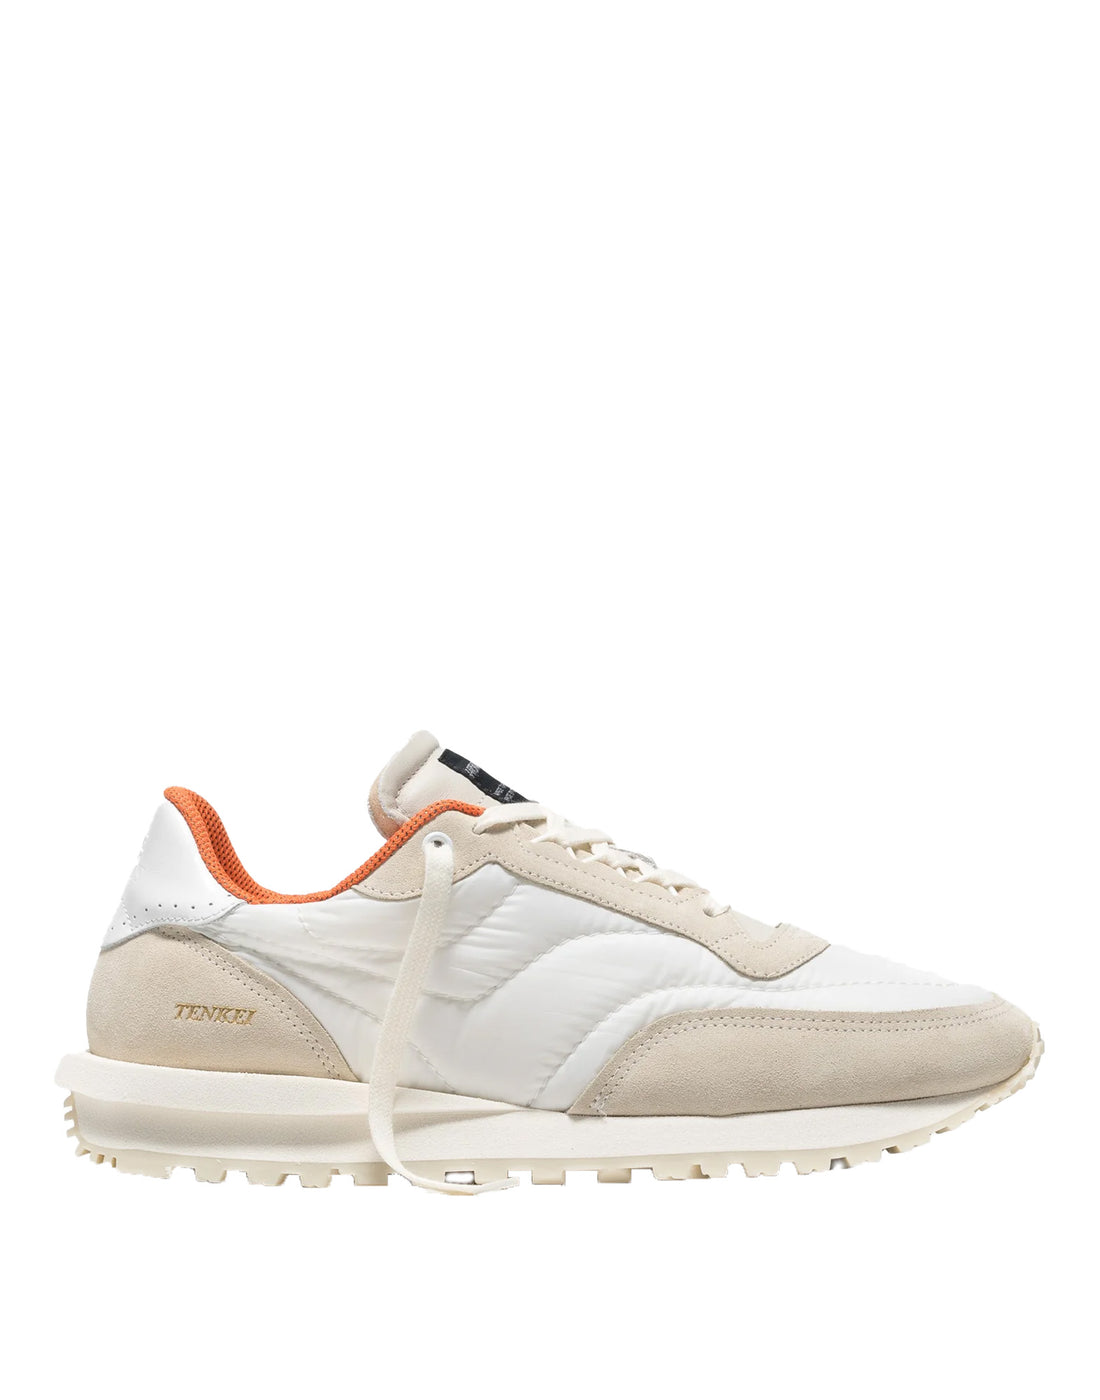 HIDNANDER Sneakers Tenkei Track Edition Total White